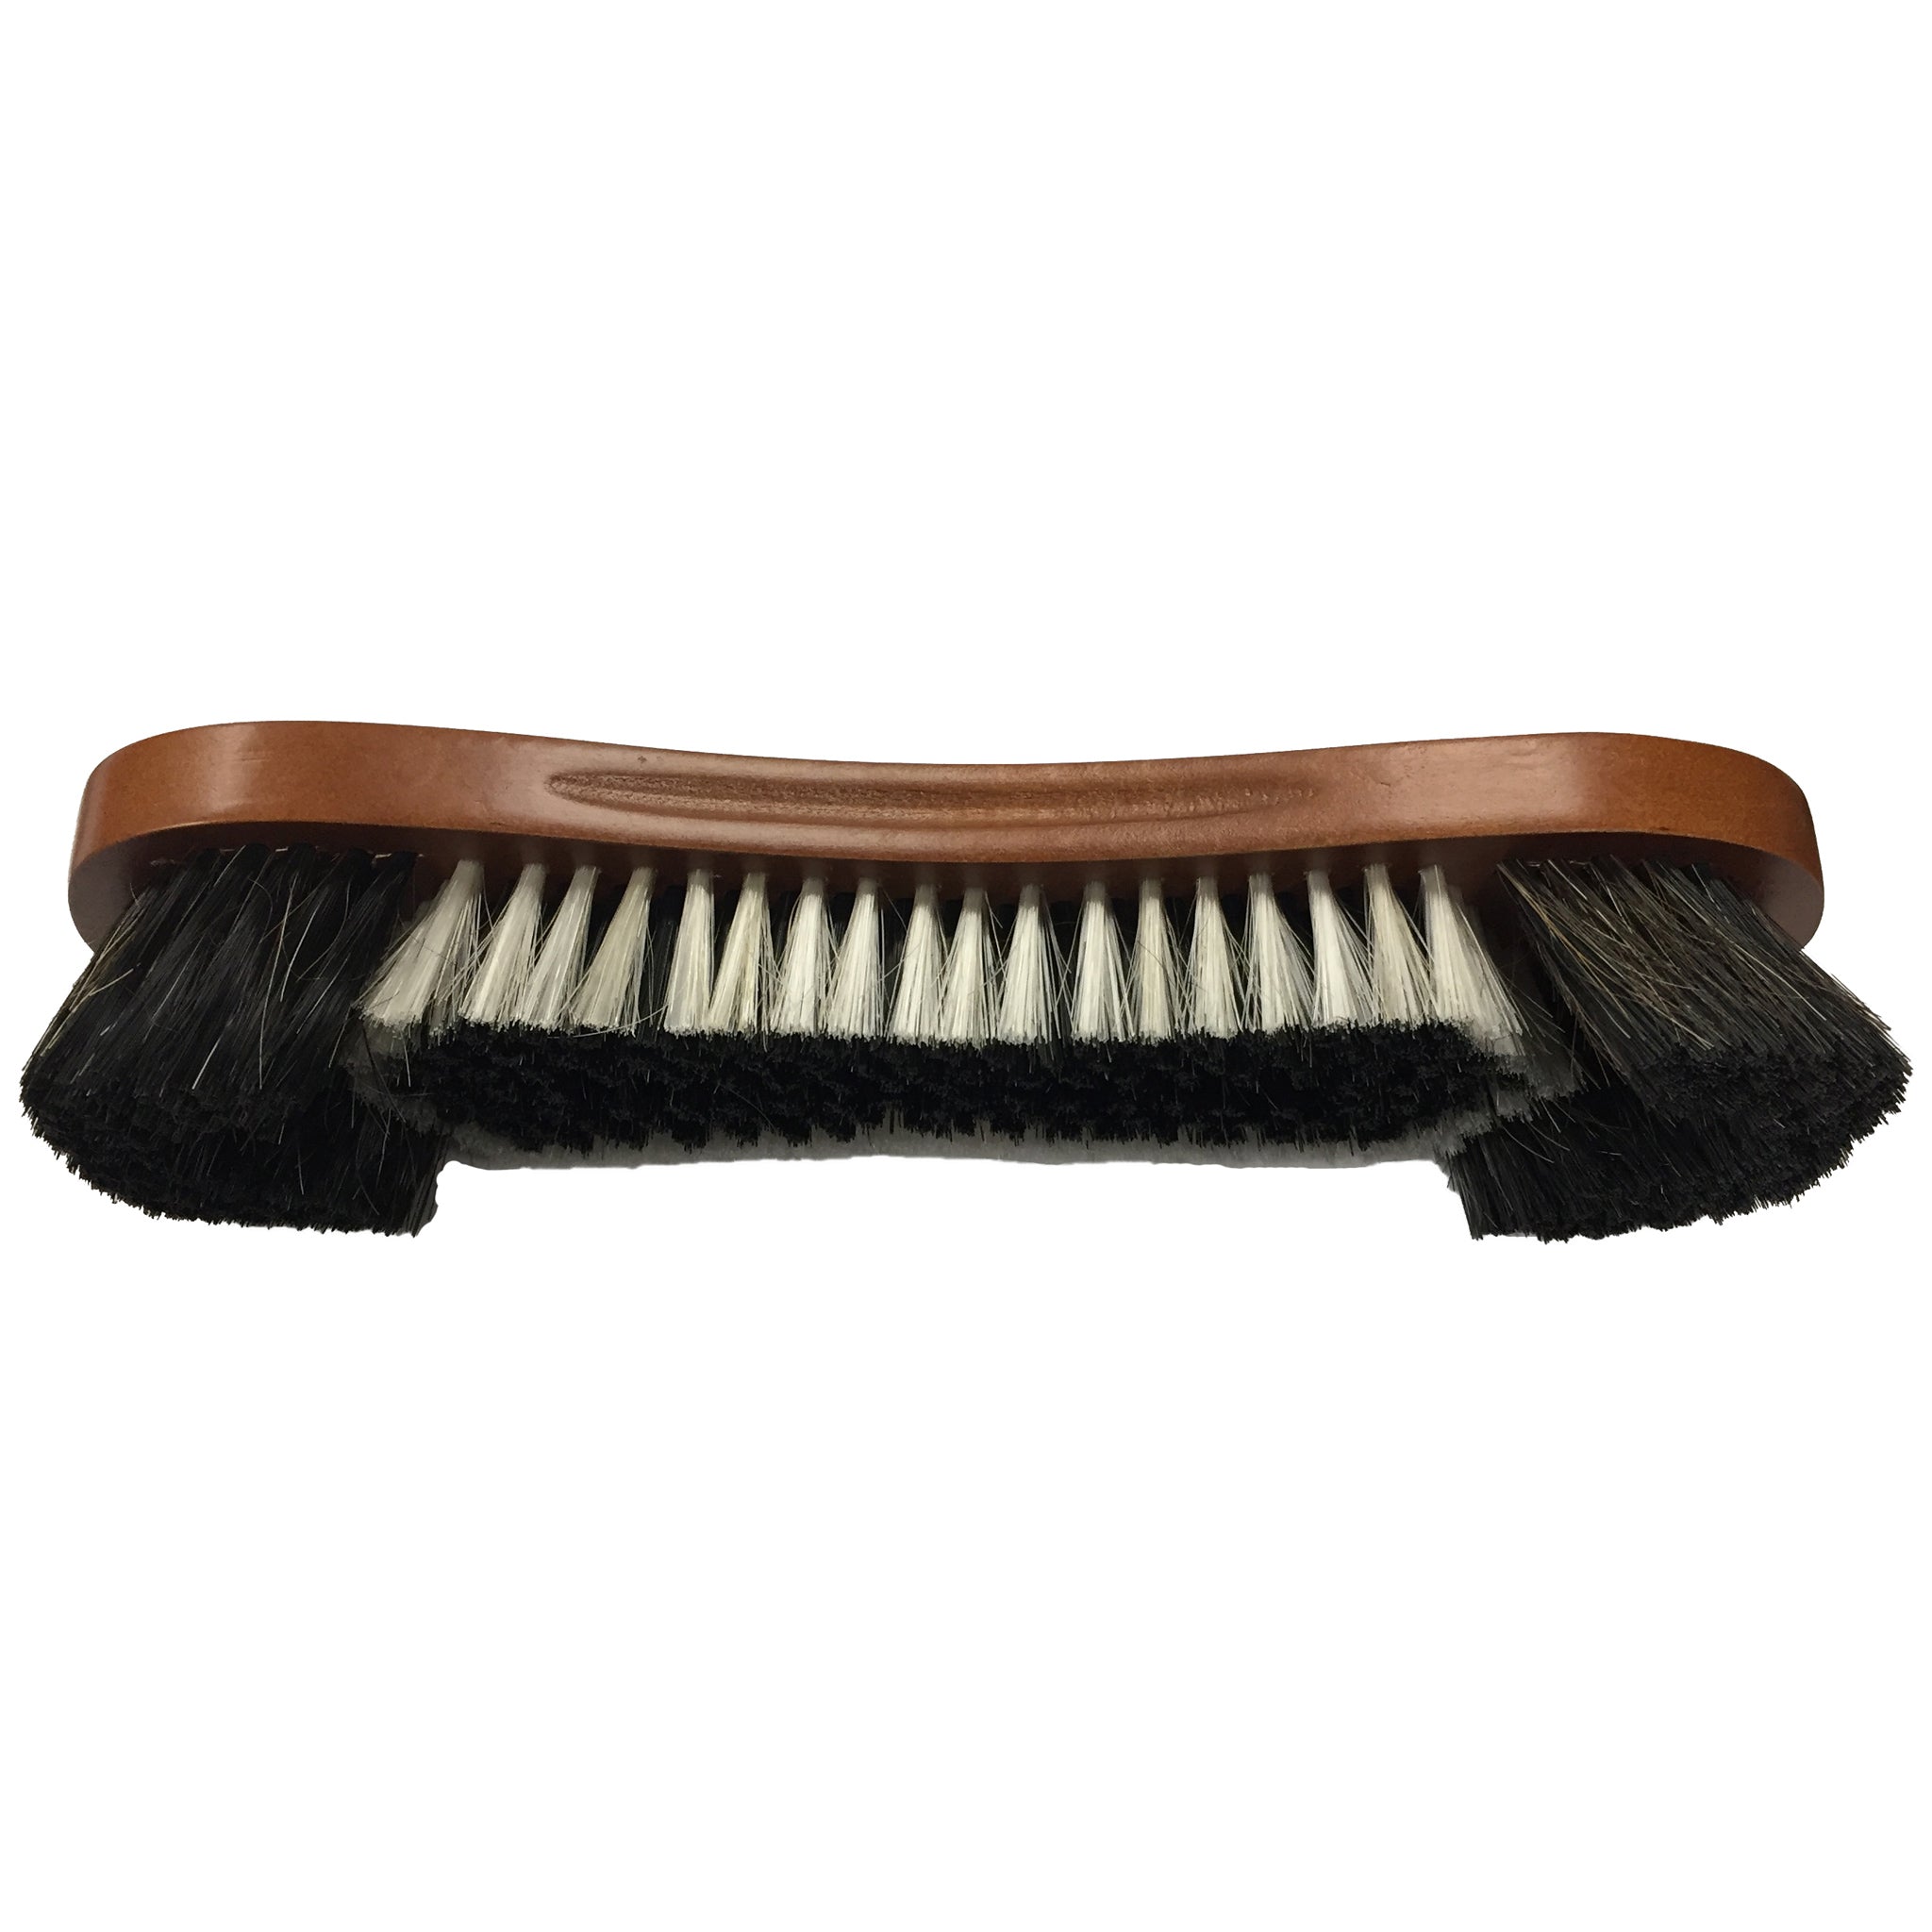 Pool Table Cleaners- 10 1/2 Horse Hair Wooden Pool Table Brush